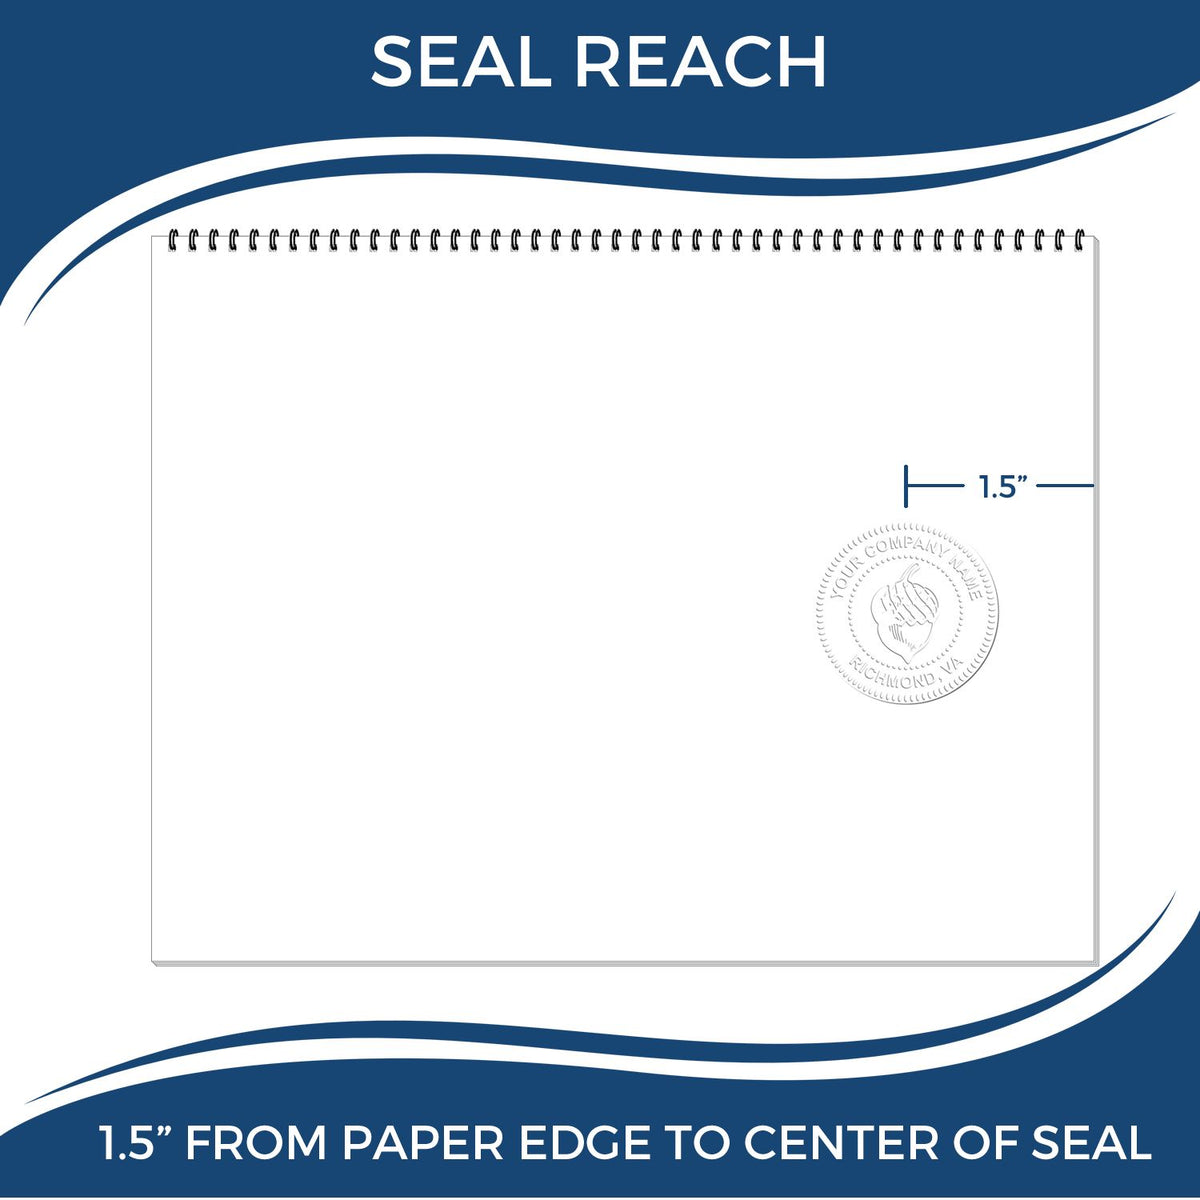 An infographic showing the seal reach which is represented by a ruler and a miniature seal image of the Handheld Indiana Land Surveyor Seal